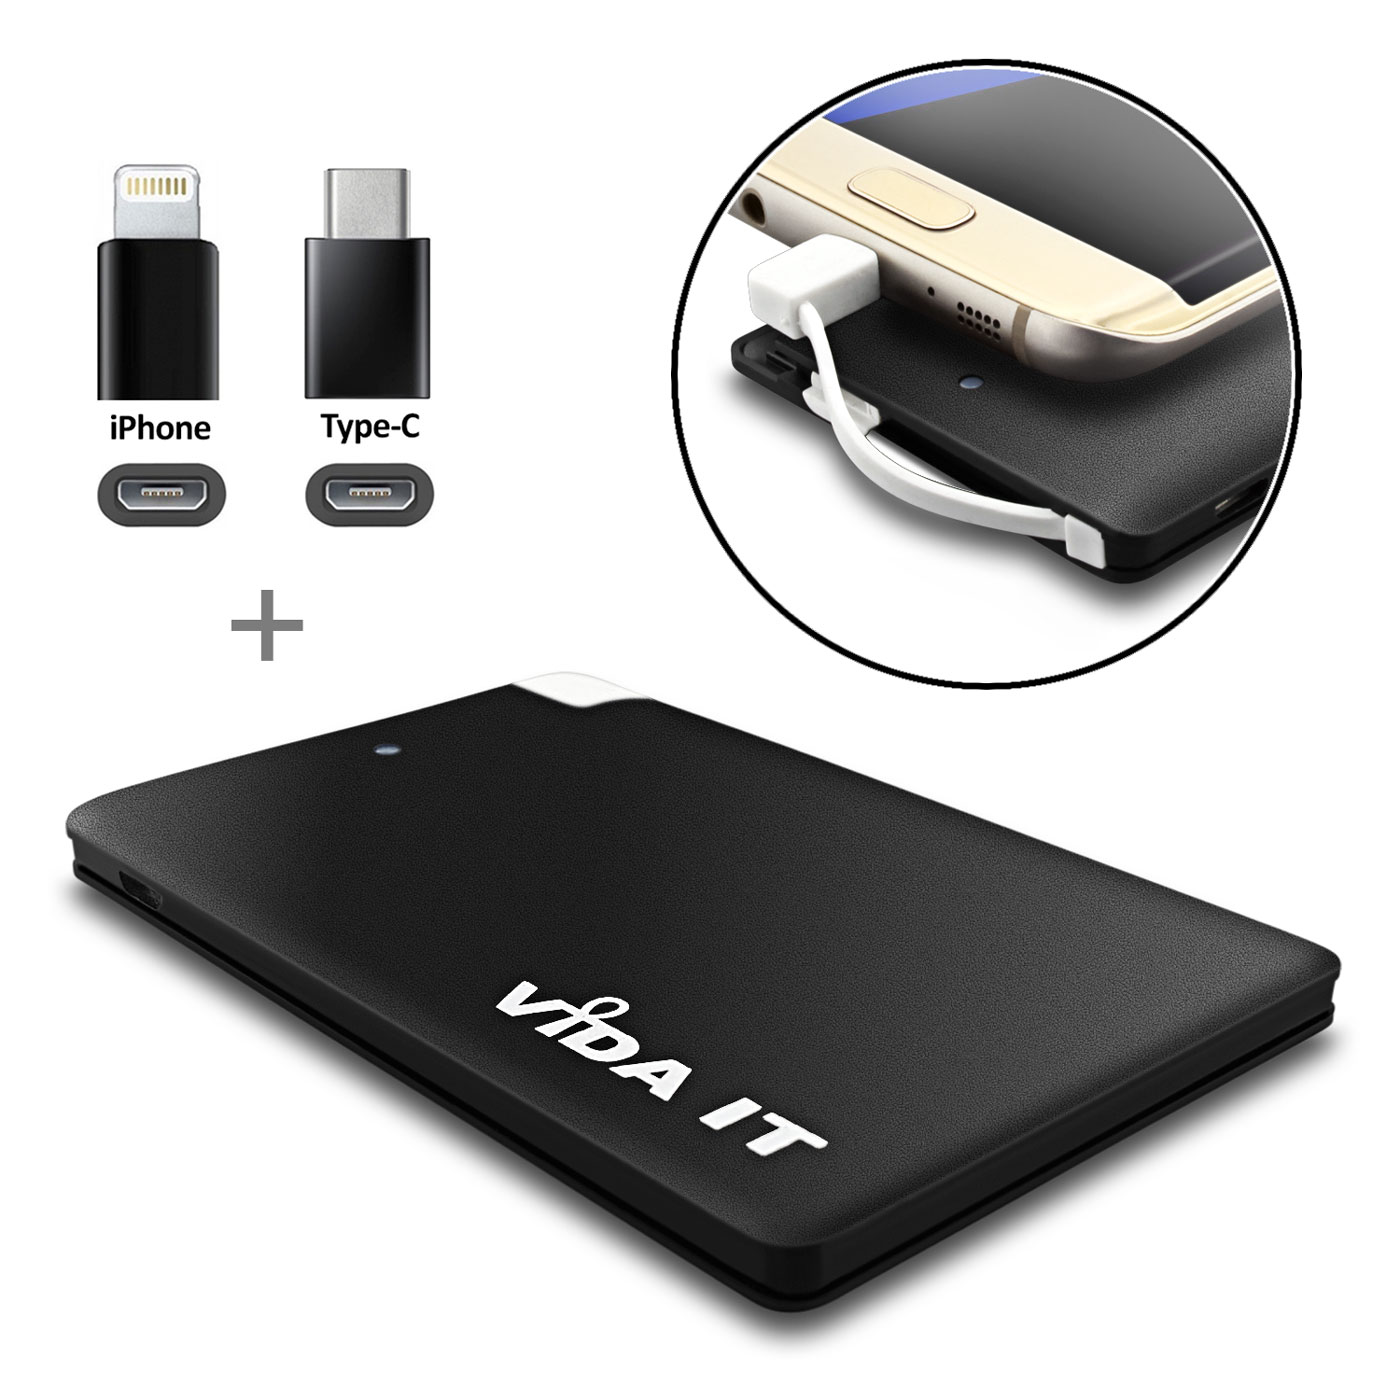 Slim credit card design Power Bank 2500mAh external battery pack thin portable USB charger with built-in micro-usb charging cable plus two adapters for iPhone and type-C usb-c connectors for mobile phone smartphone tablet pc